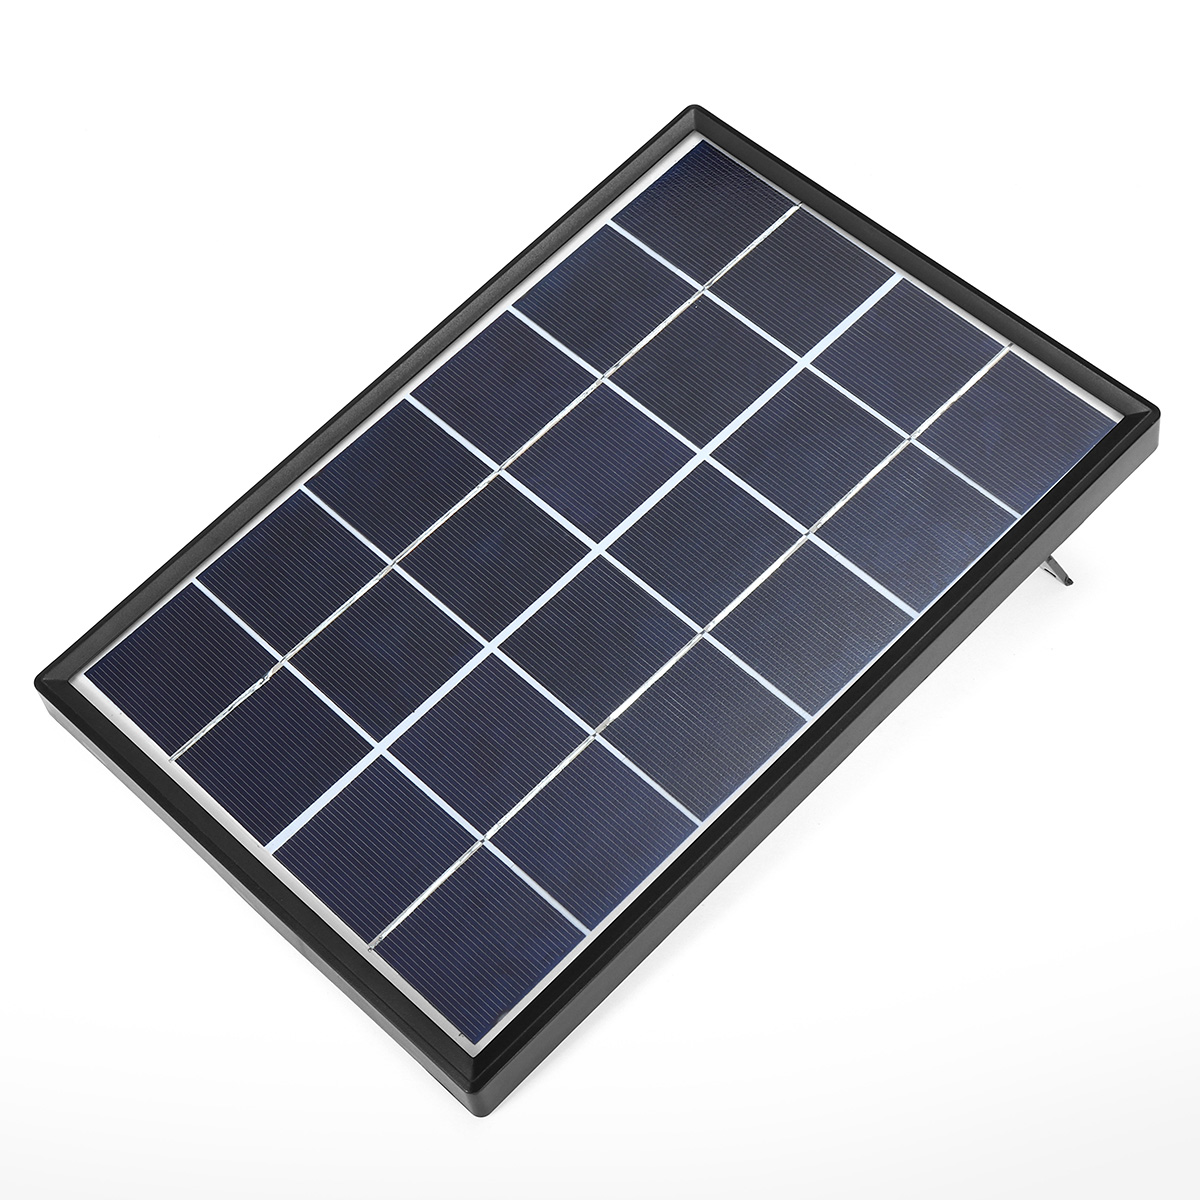 6W 6V 266*175*17mm Polysilicon Solar Panel with Cable & Border 26